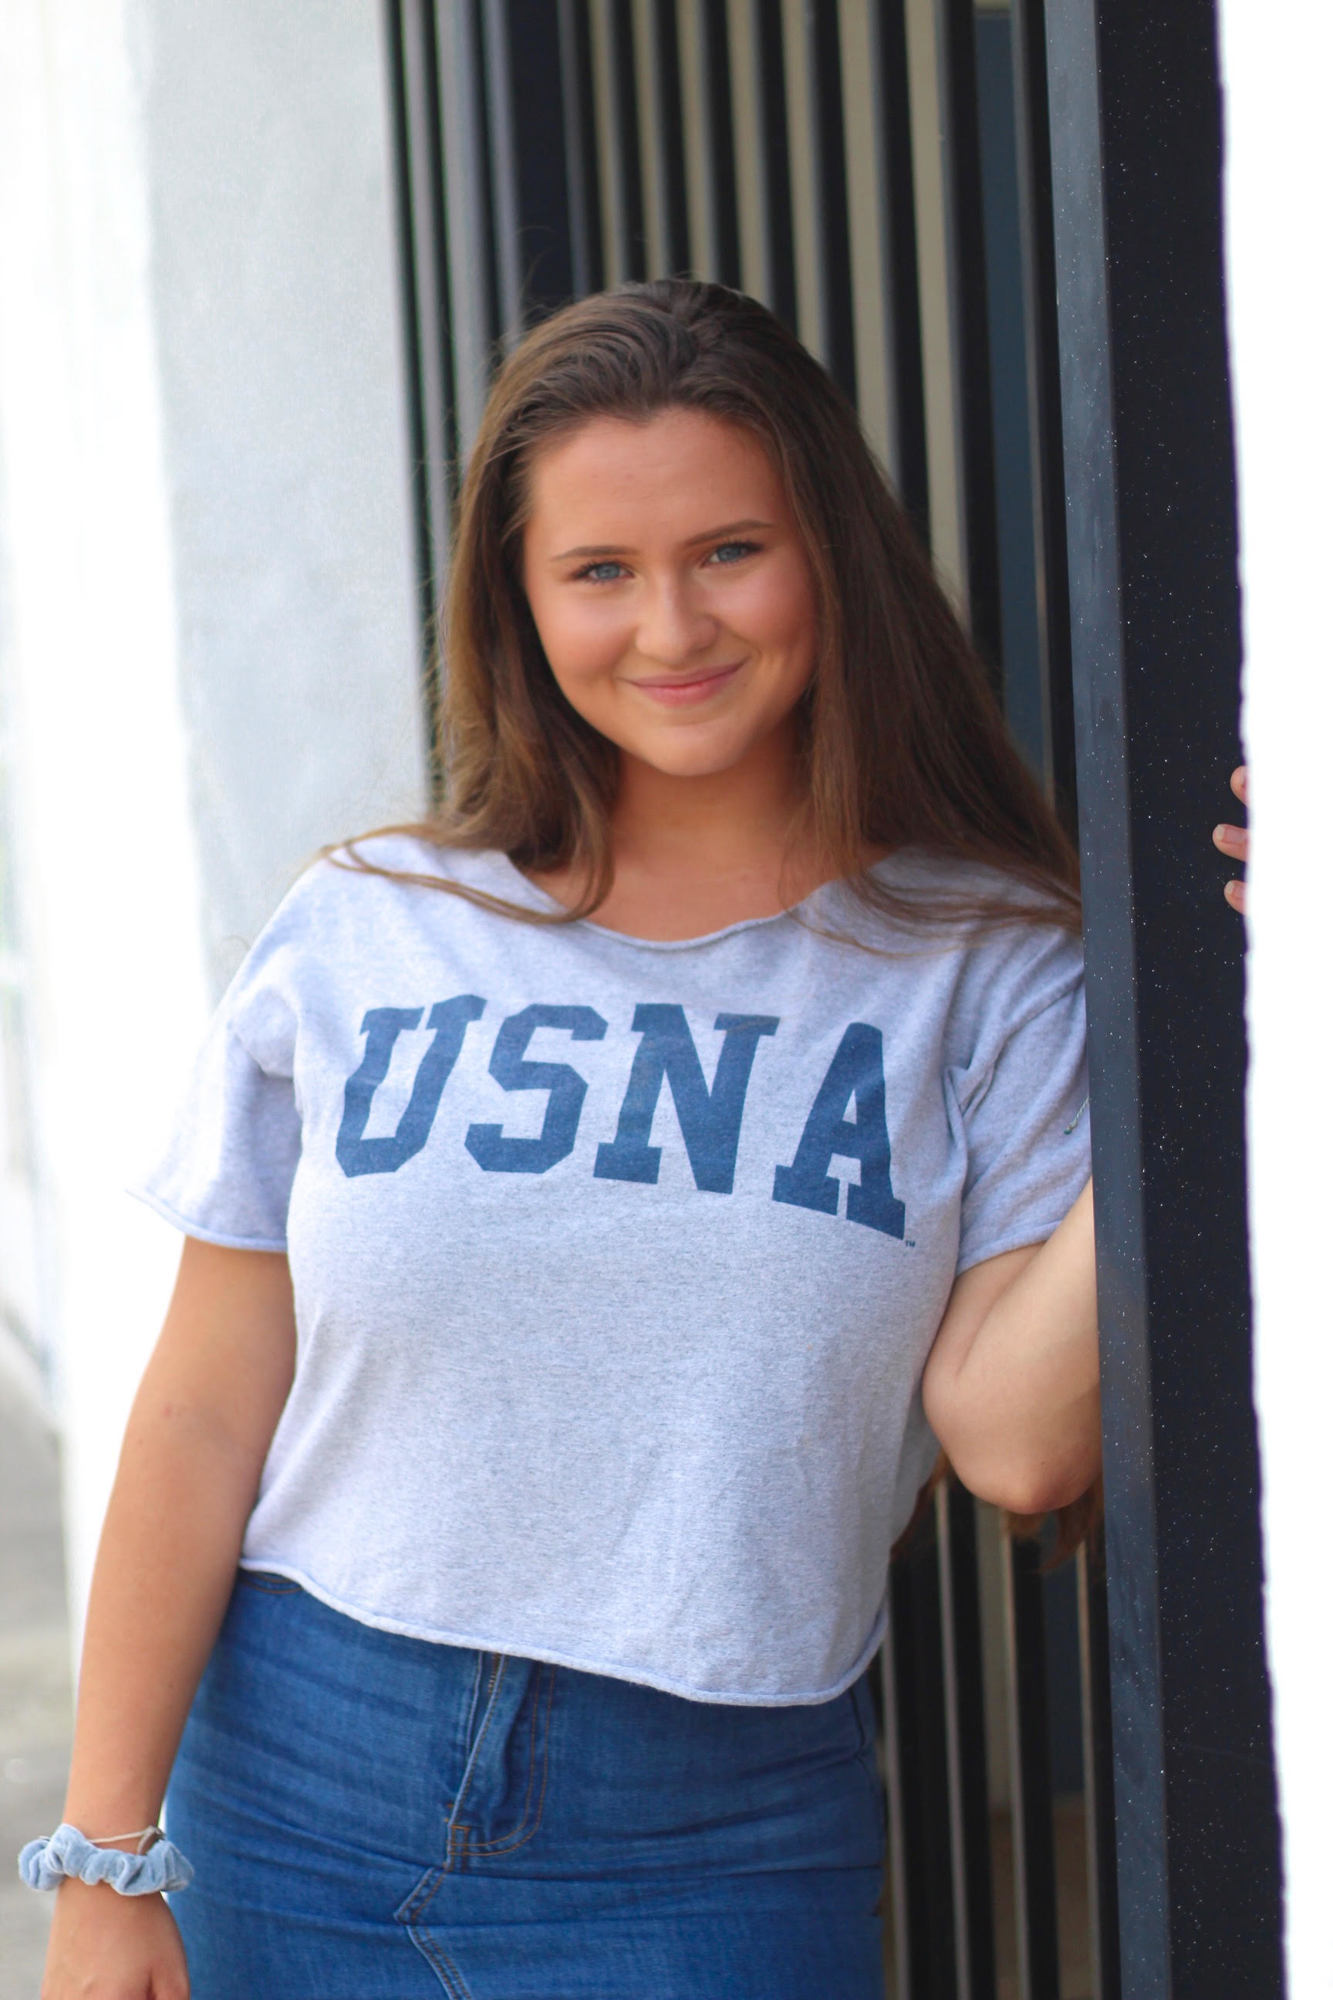 Samantha Drouin is heading to the U.S. Naval Academy.